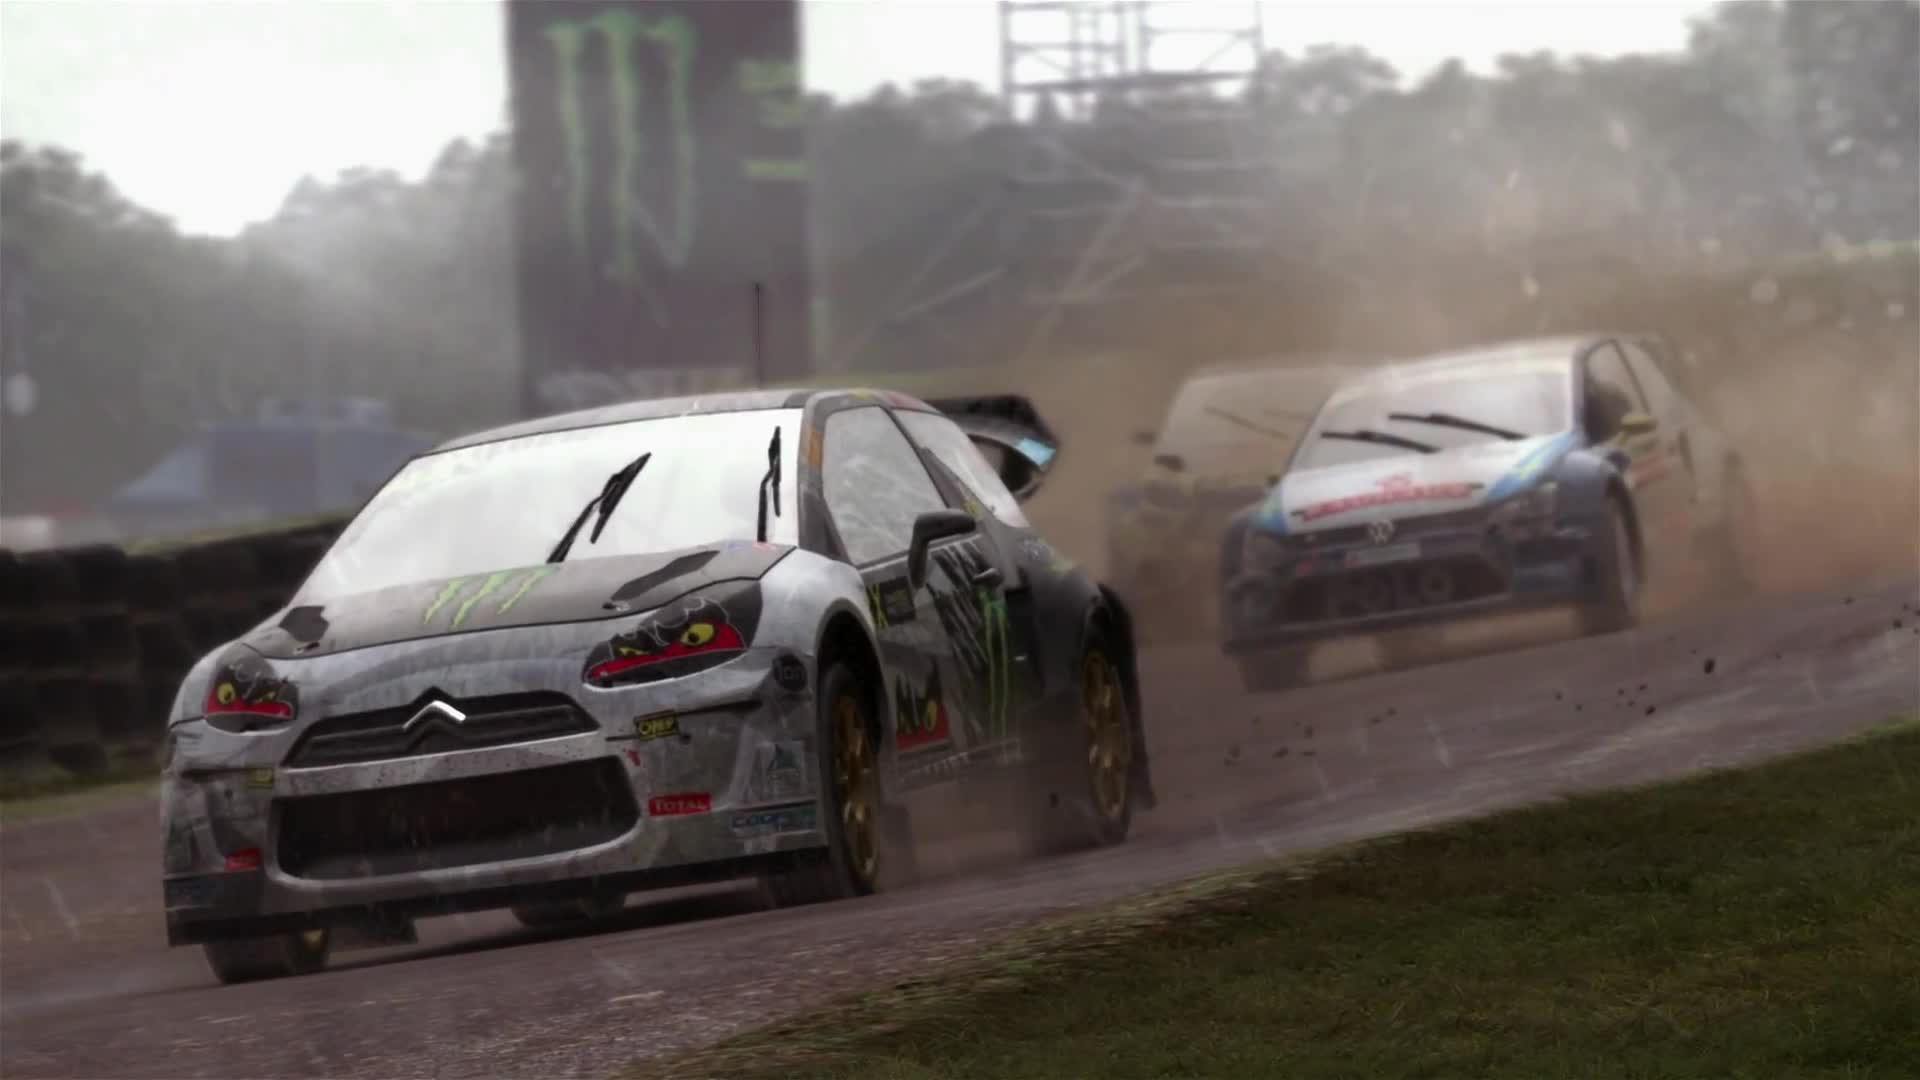 DiRT Rally - Cars of DiRT Modern Masters